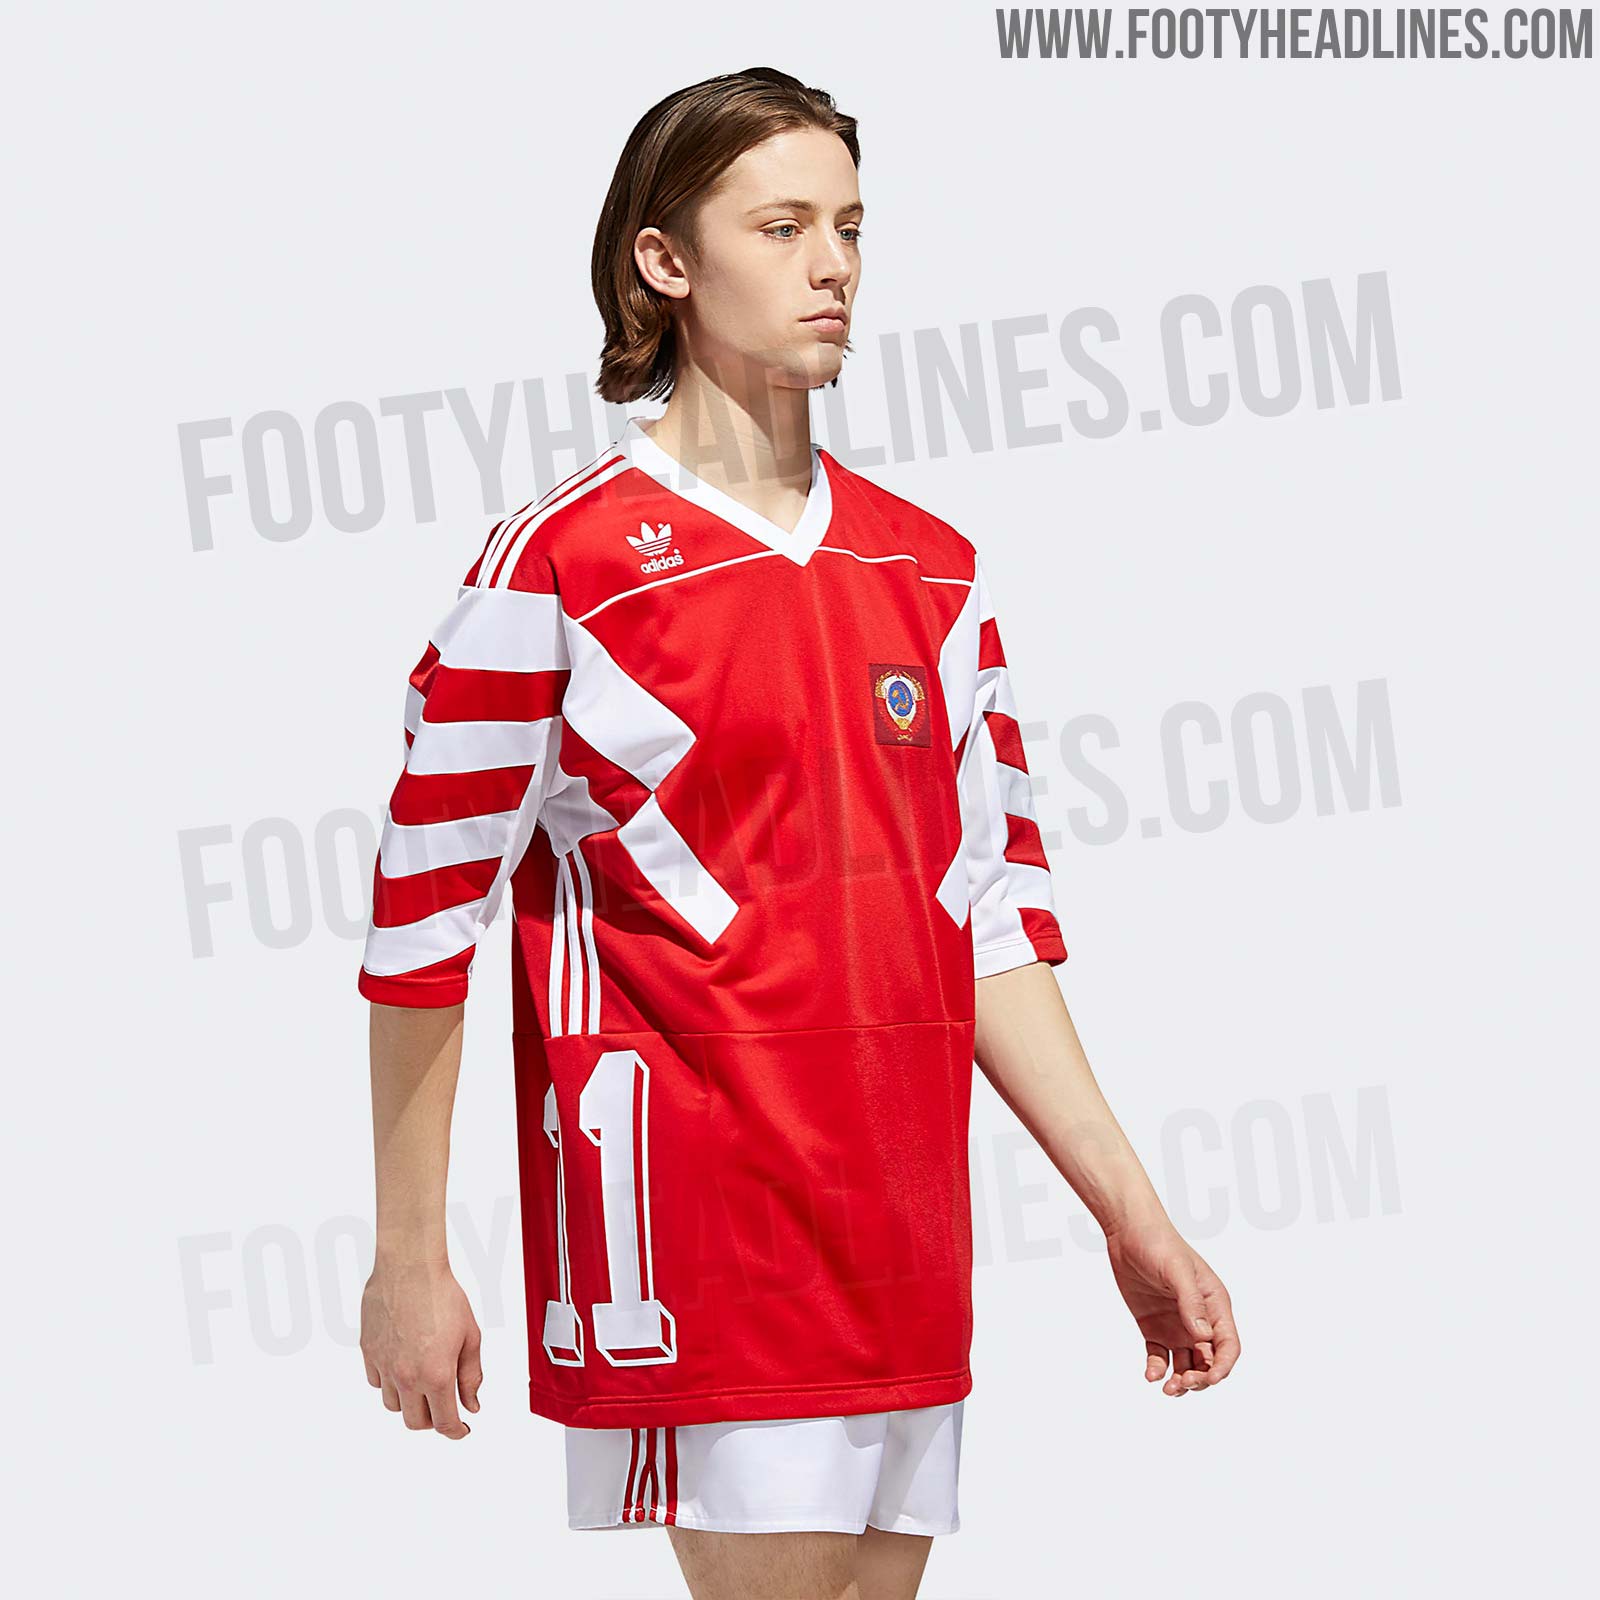 OFFICIAL Pictures: Adidas Russia 2018 World Cup Mash-Up Jersey Leaked Footy